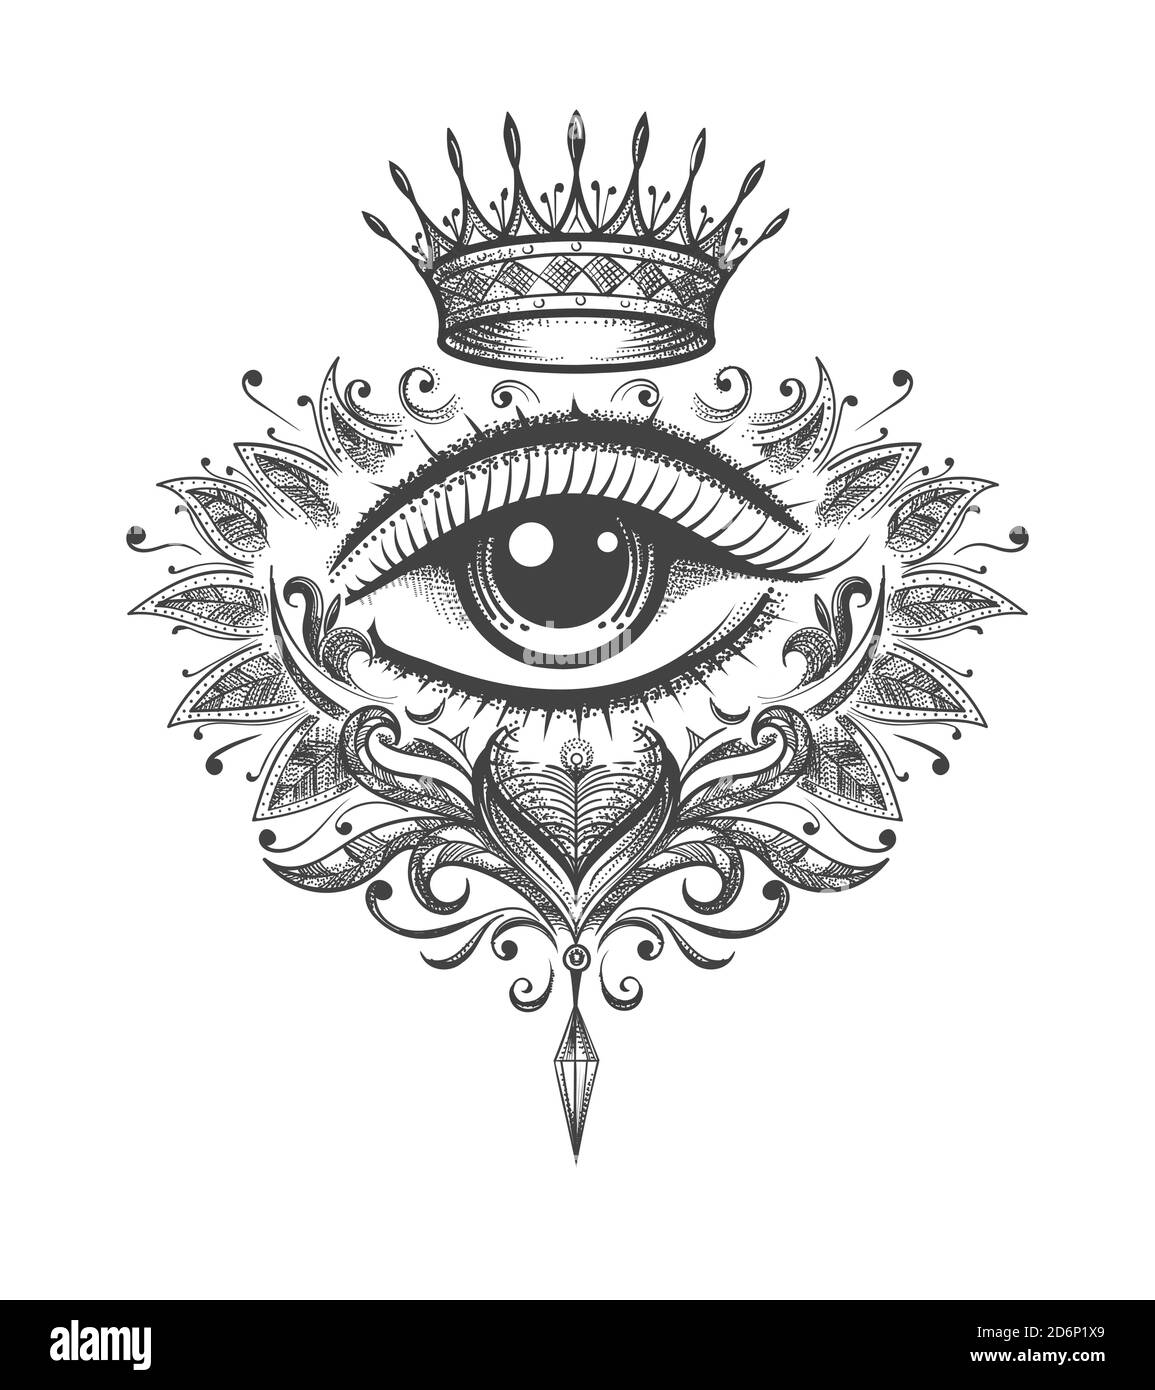 All seeing eye tattoo Black and White Stock Photos & Images - Alamy